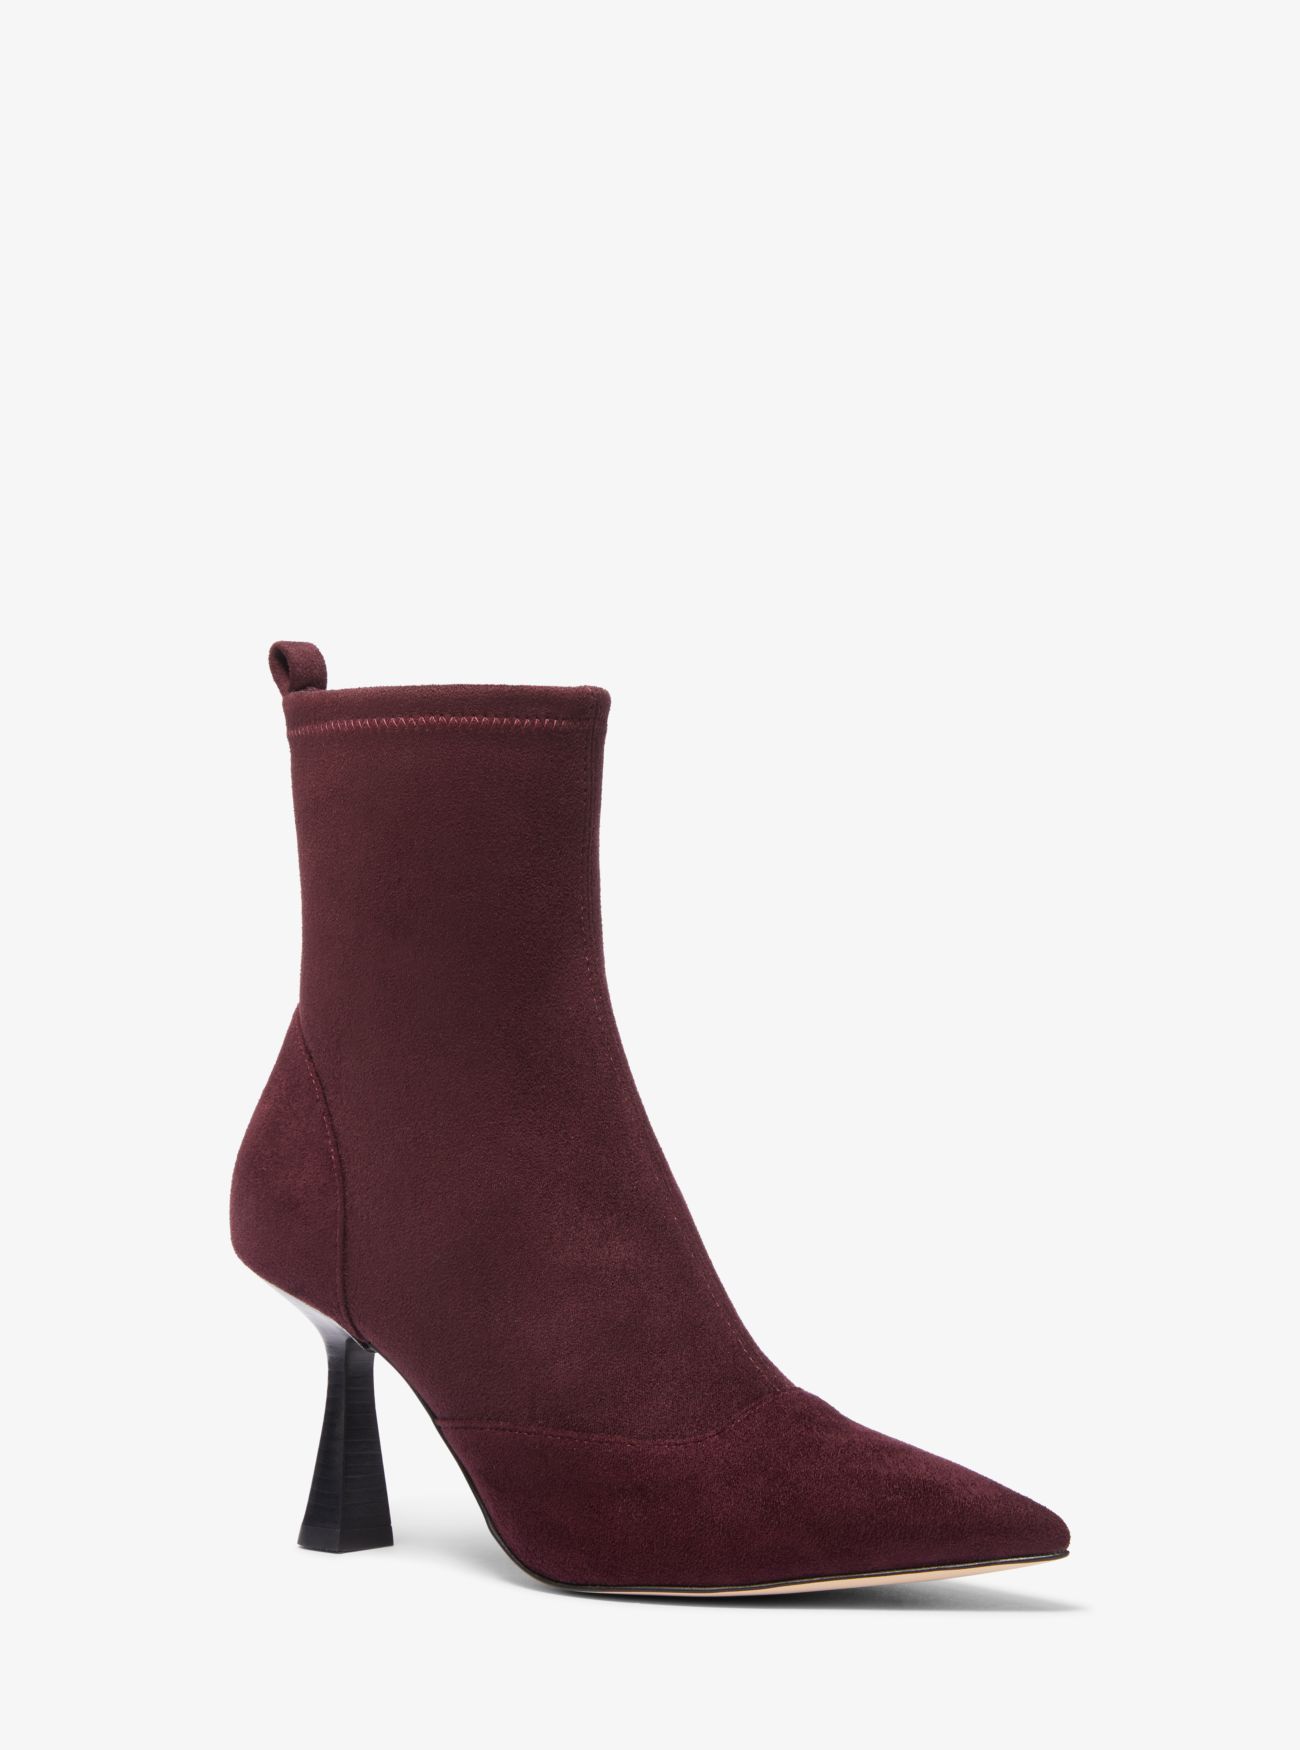 MK Clara Faux Suede Ankle Boot - Red - Michael Kors